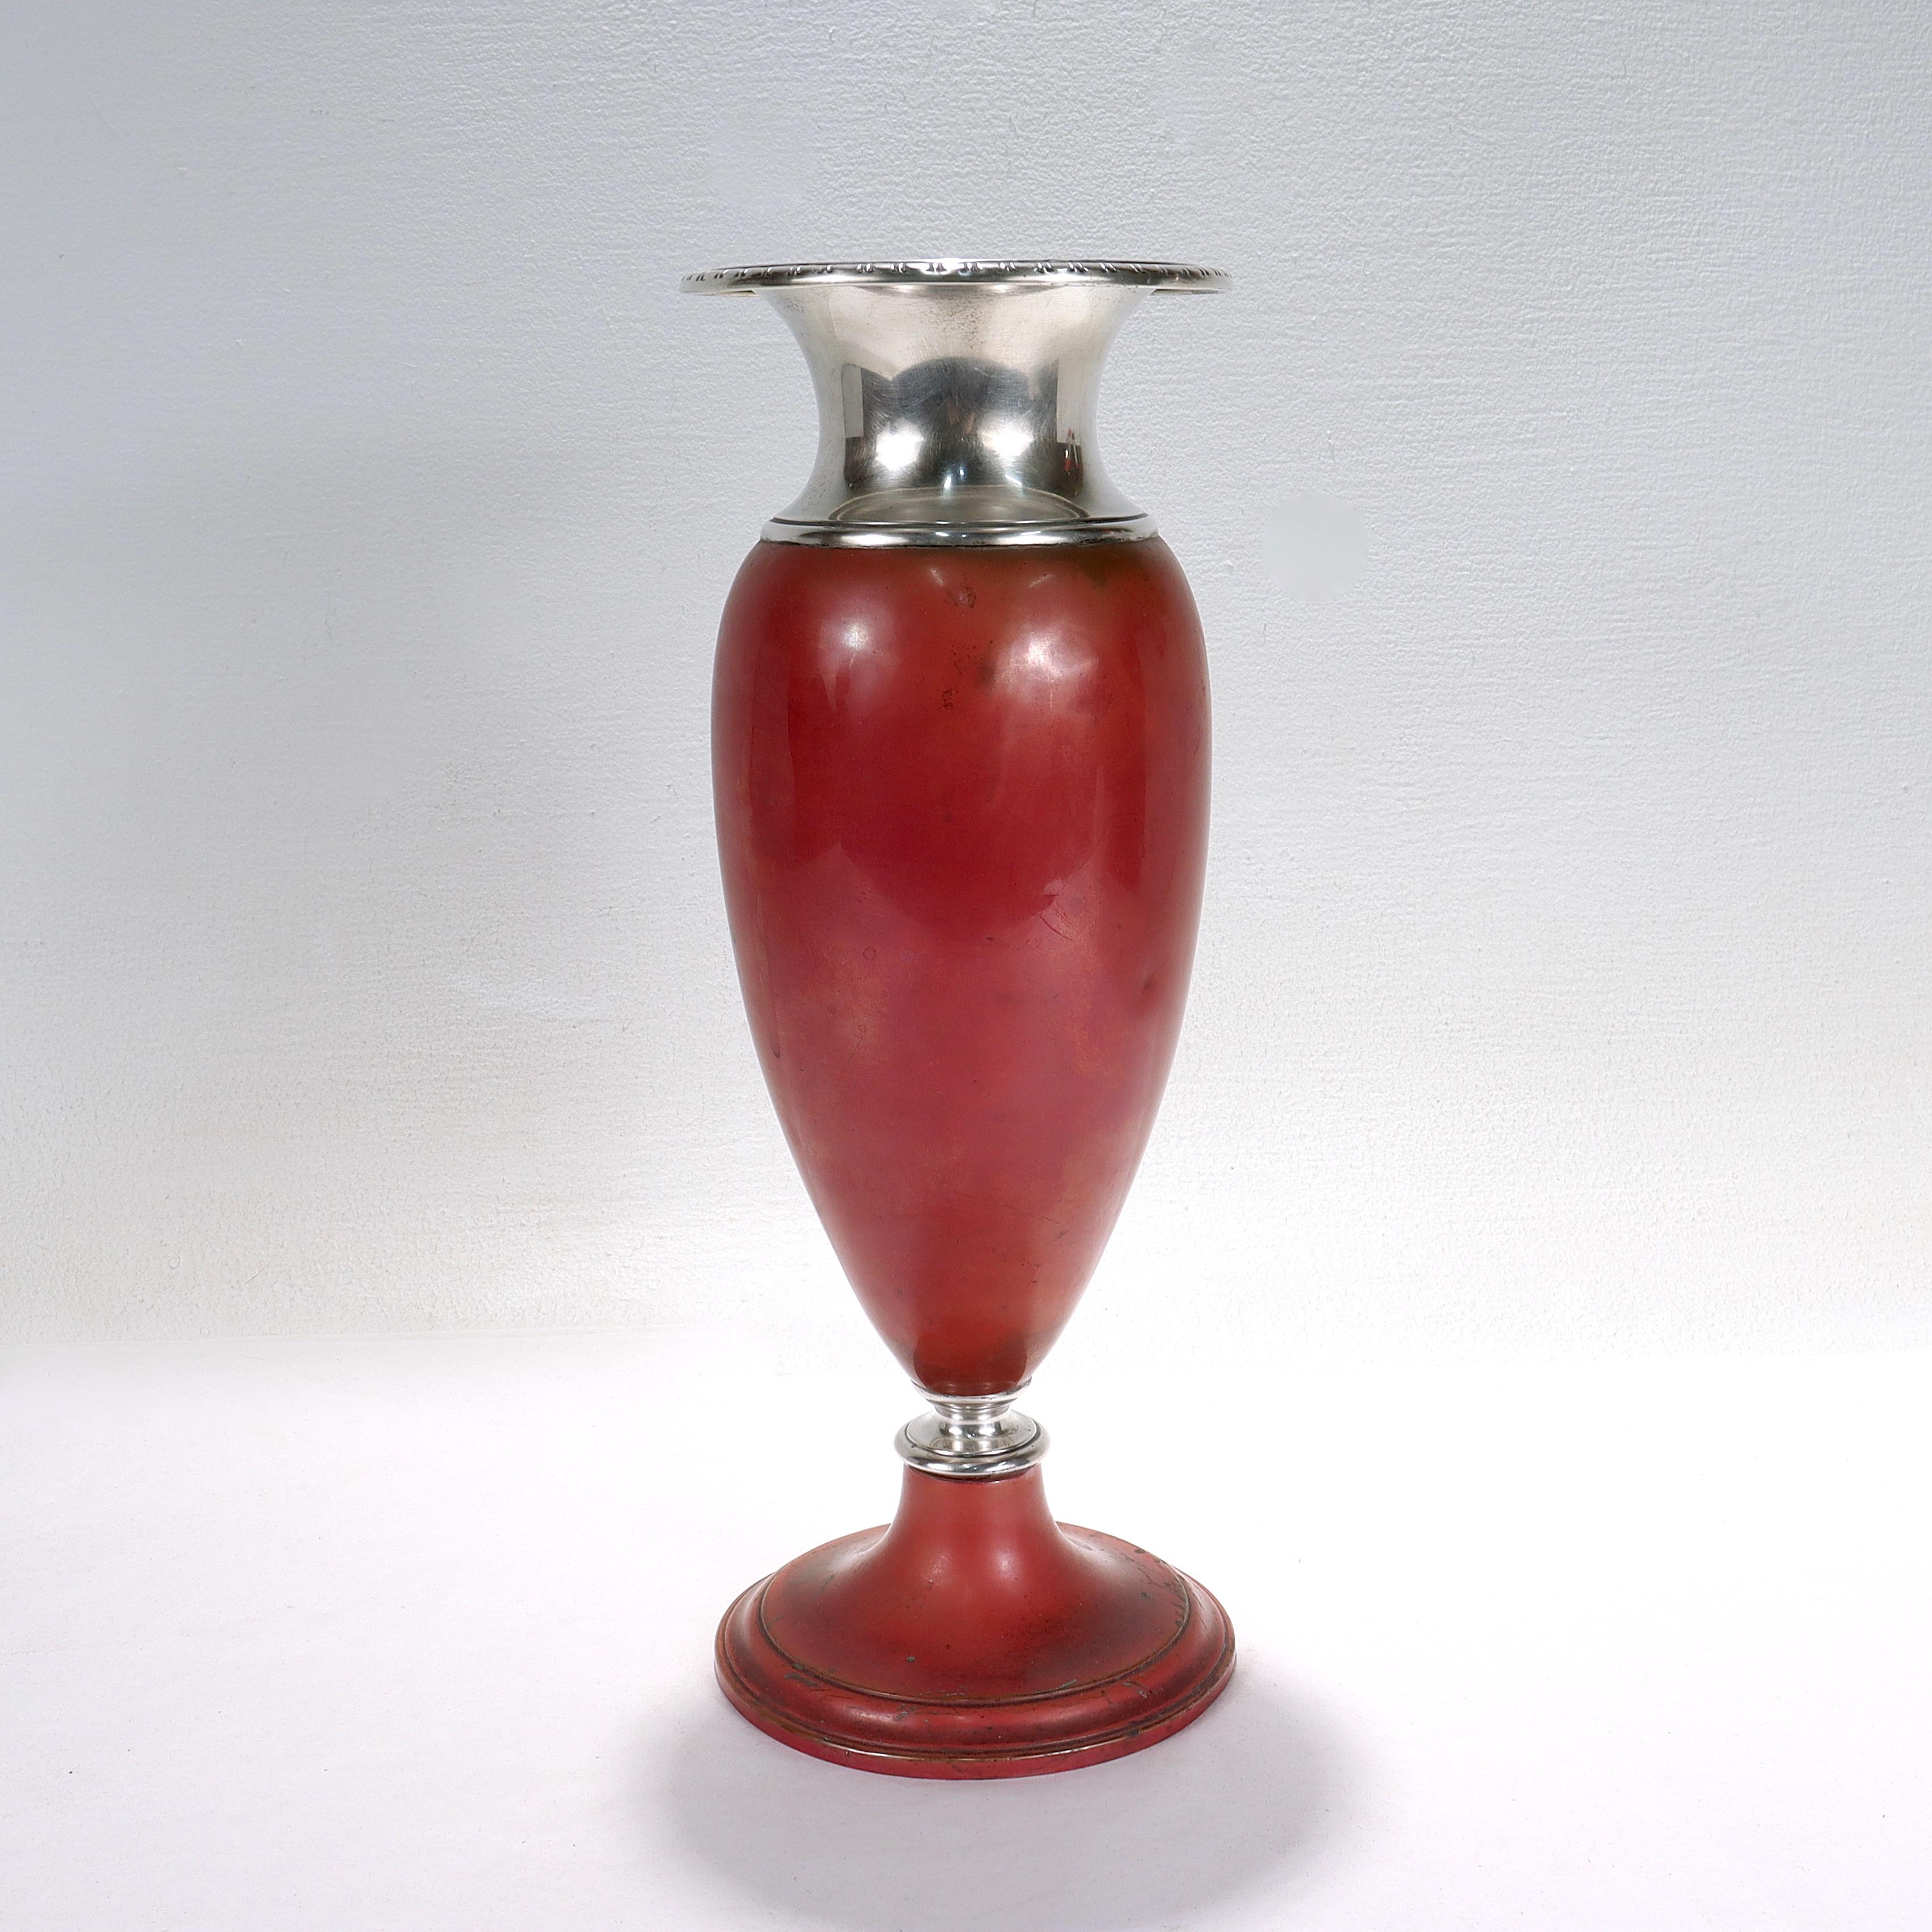 A fine Art Deco mixed metals vase.

From the La Pierre Manufacturing Company's 'Babylonian' line. 

In sterling silver and copper.

Consisting of a copper body with a wide sterling silver neck and rim and a sterling silver ferrule. 

With a lovely